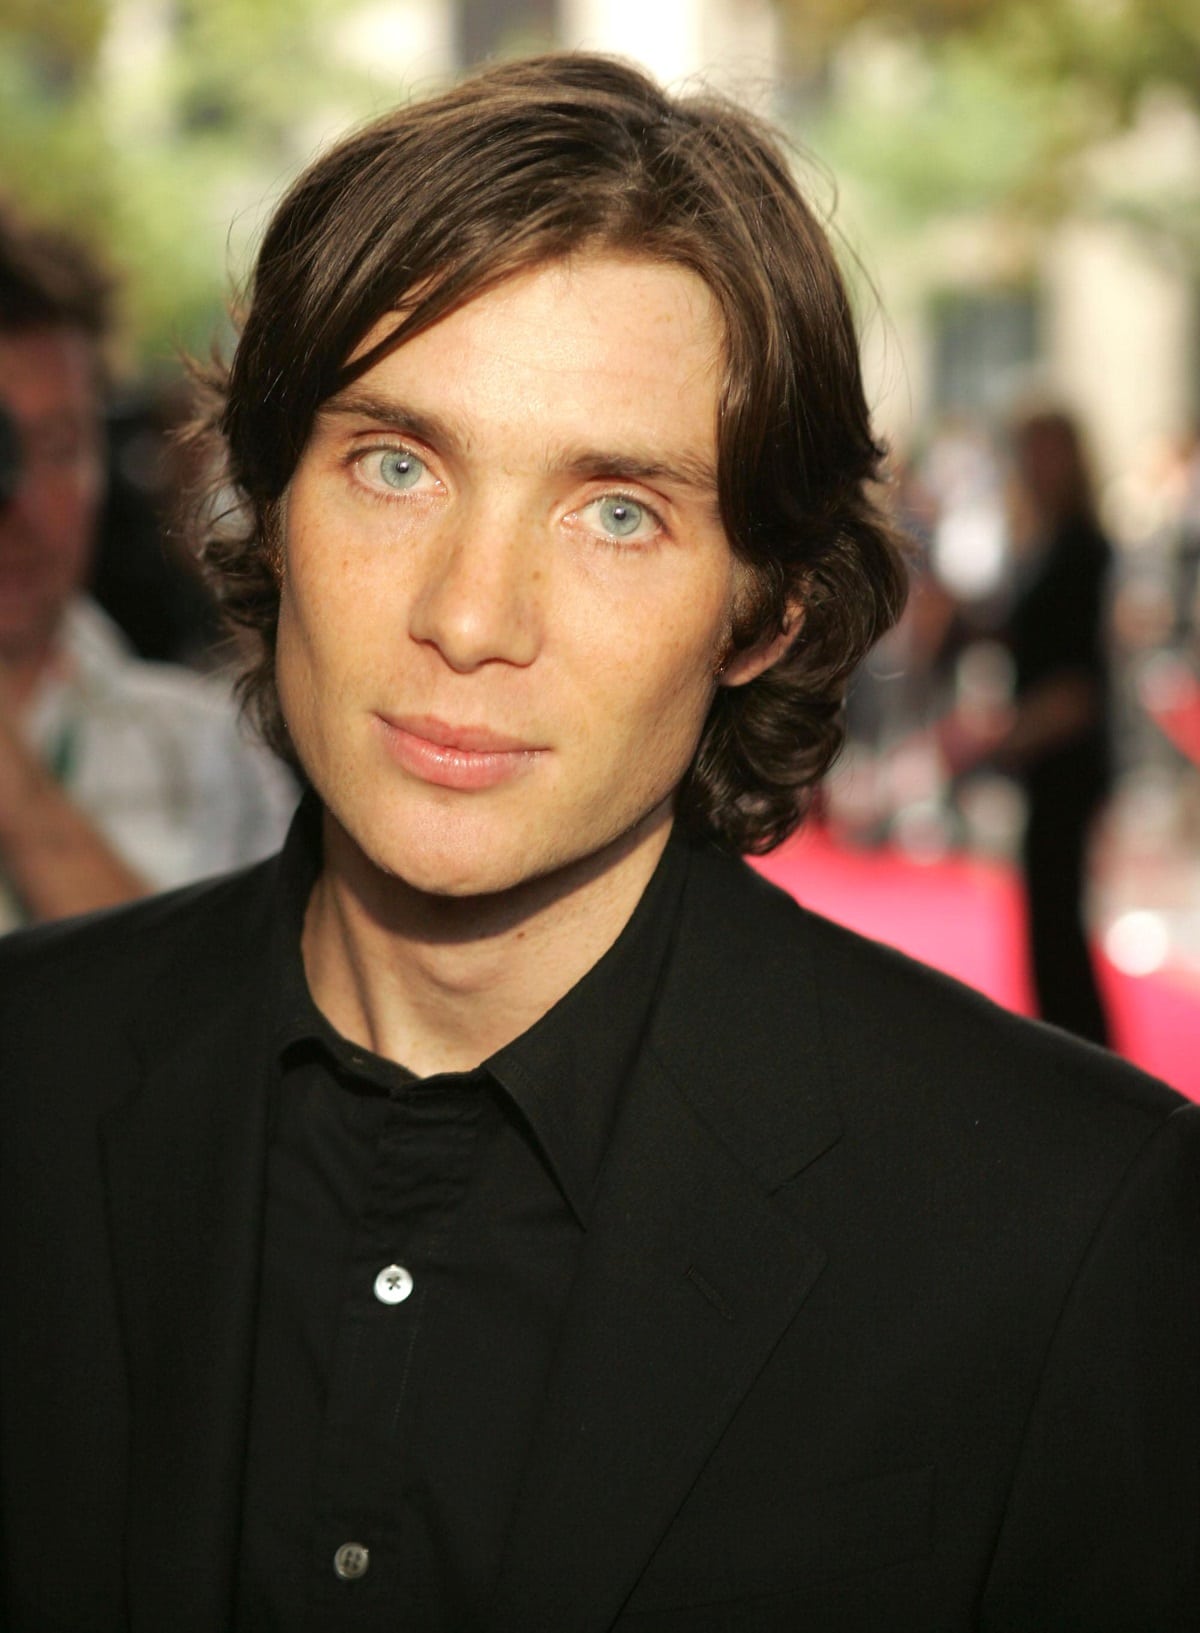 Cillian Murphy at the premiere of The Wind That Shakes